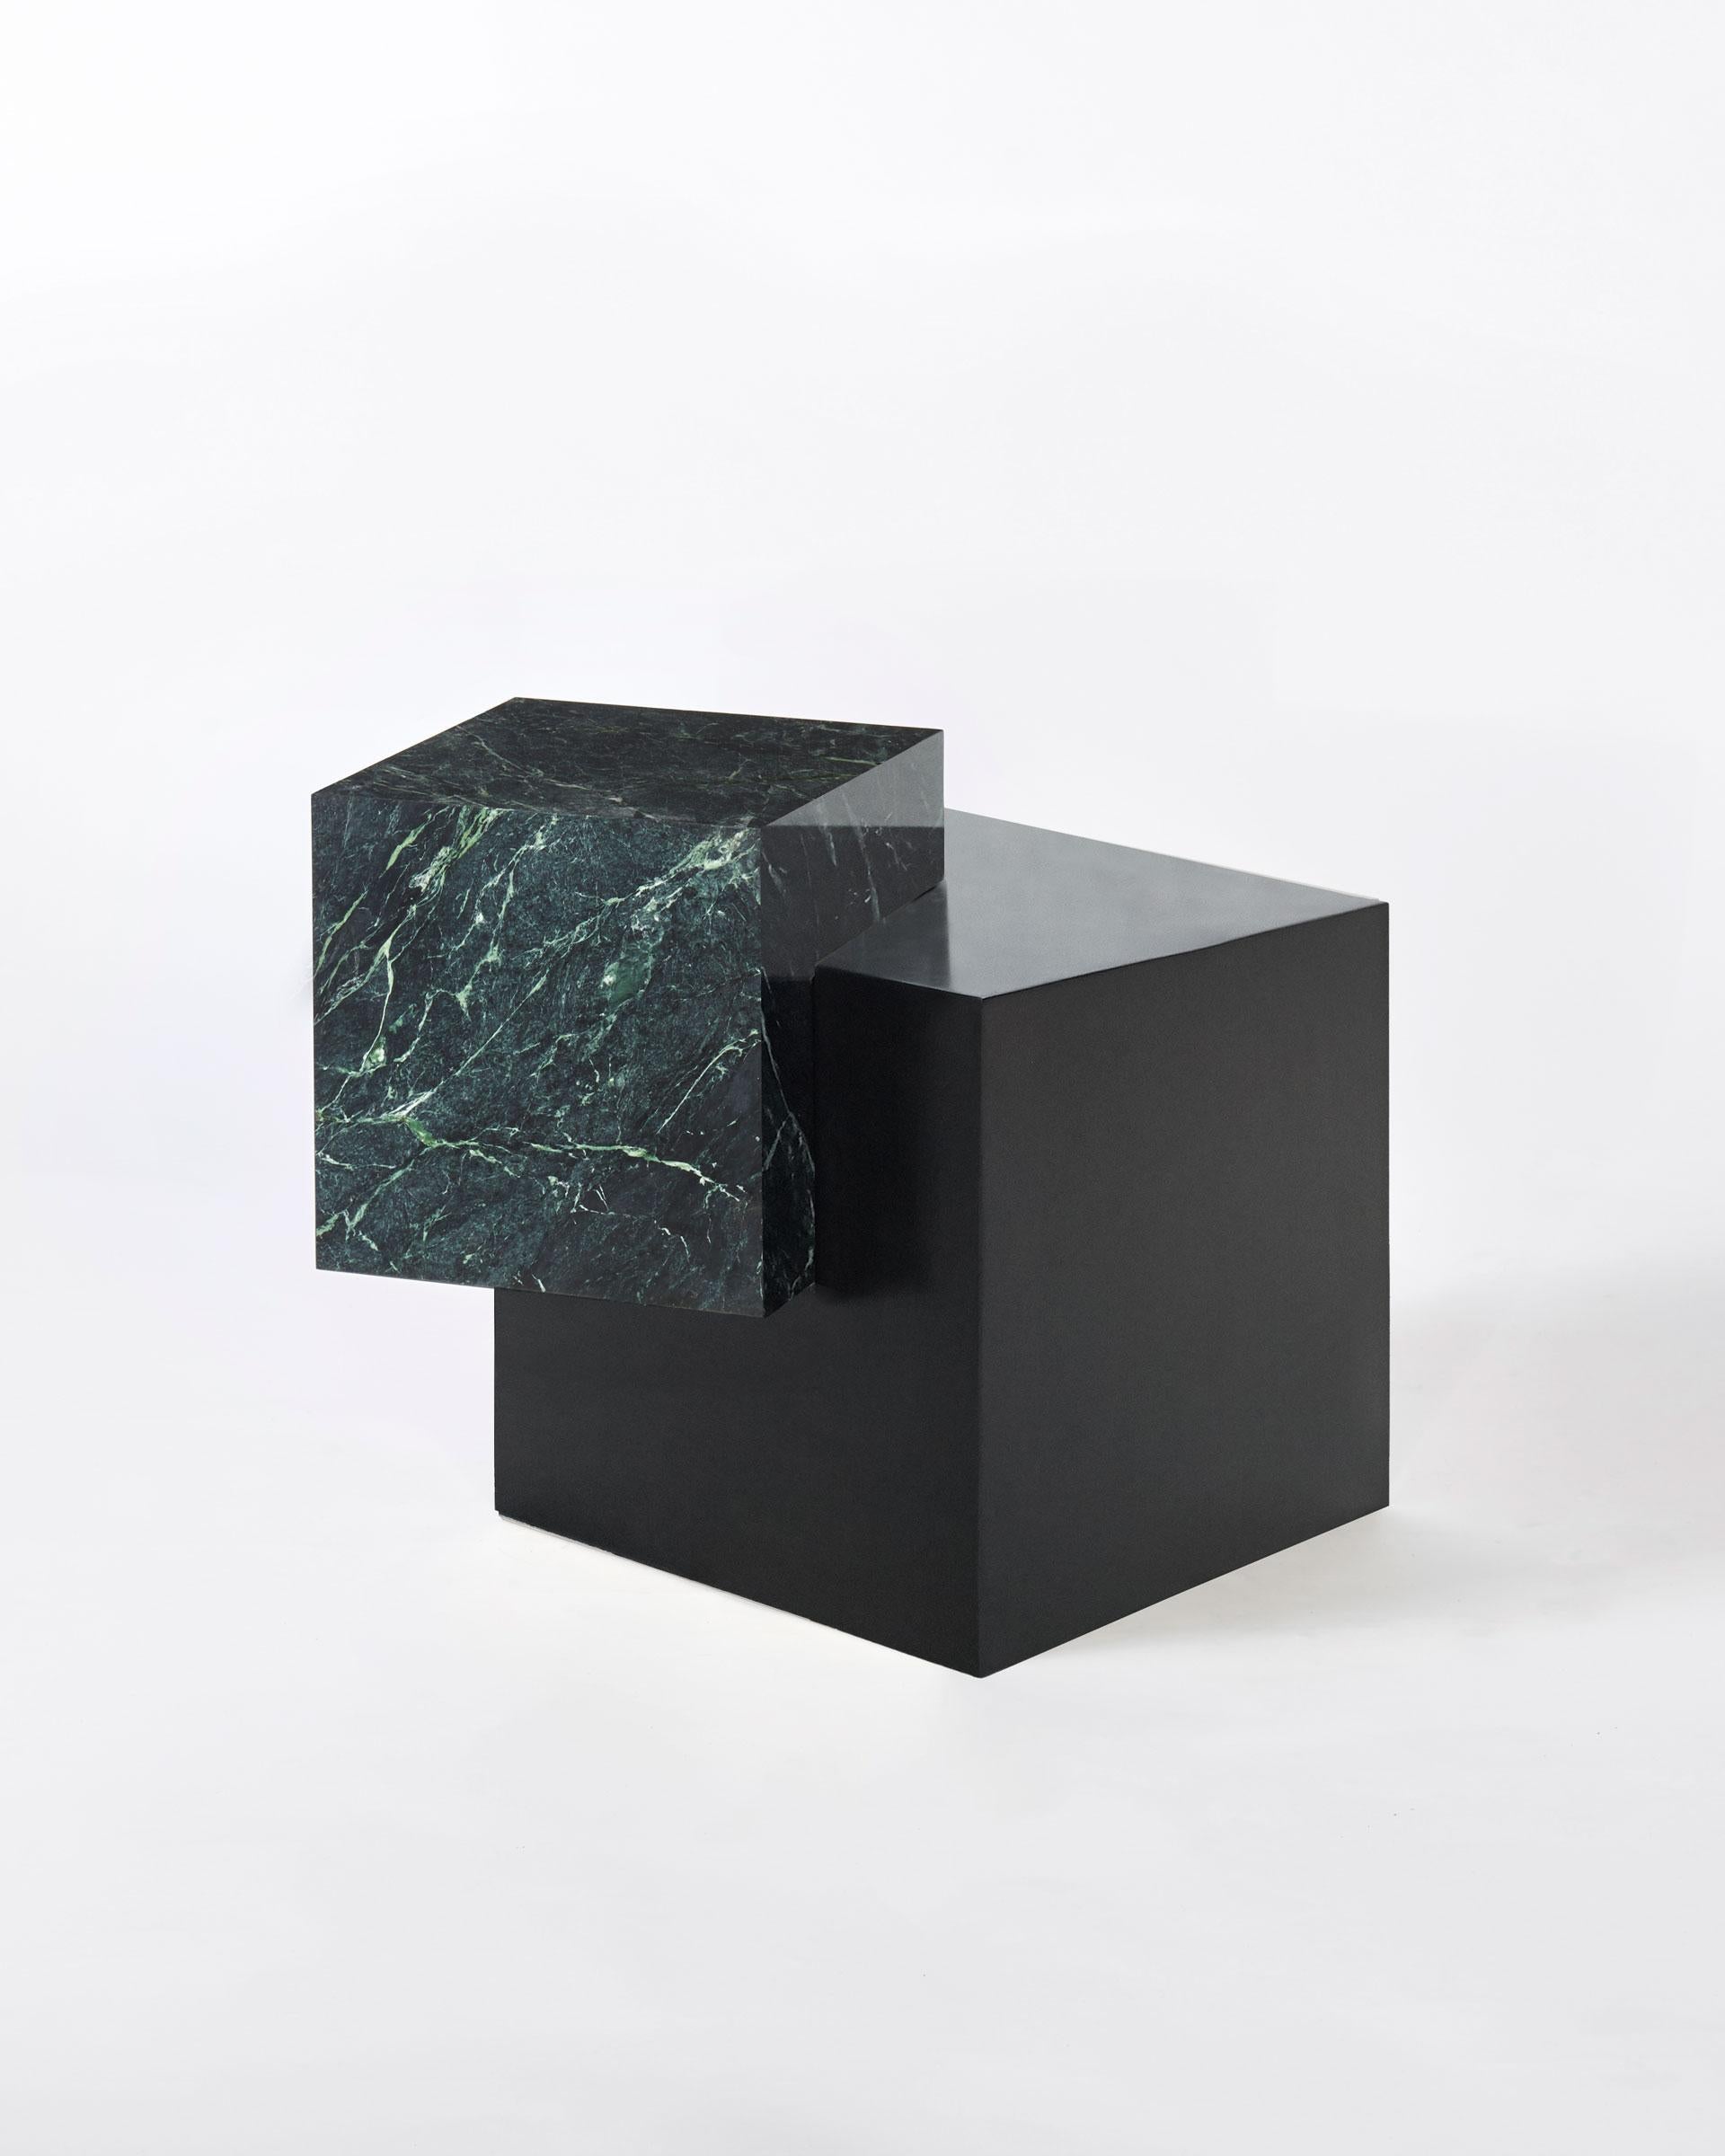 The coexist askew is an exploration of balance, material and harmony. The materials consist of a black steel cube base and a marble cube top.

The table features a marble cube balanced at an unexpected angle on the brass cube base. The two cubes